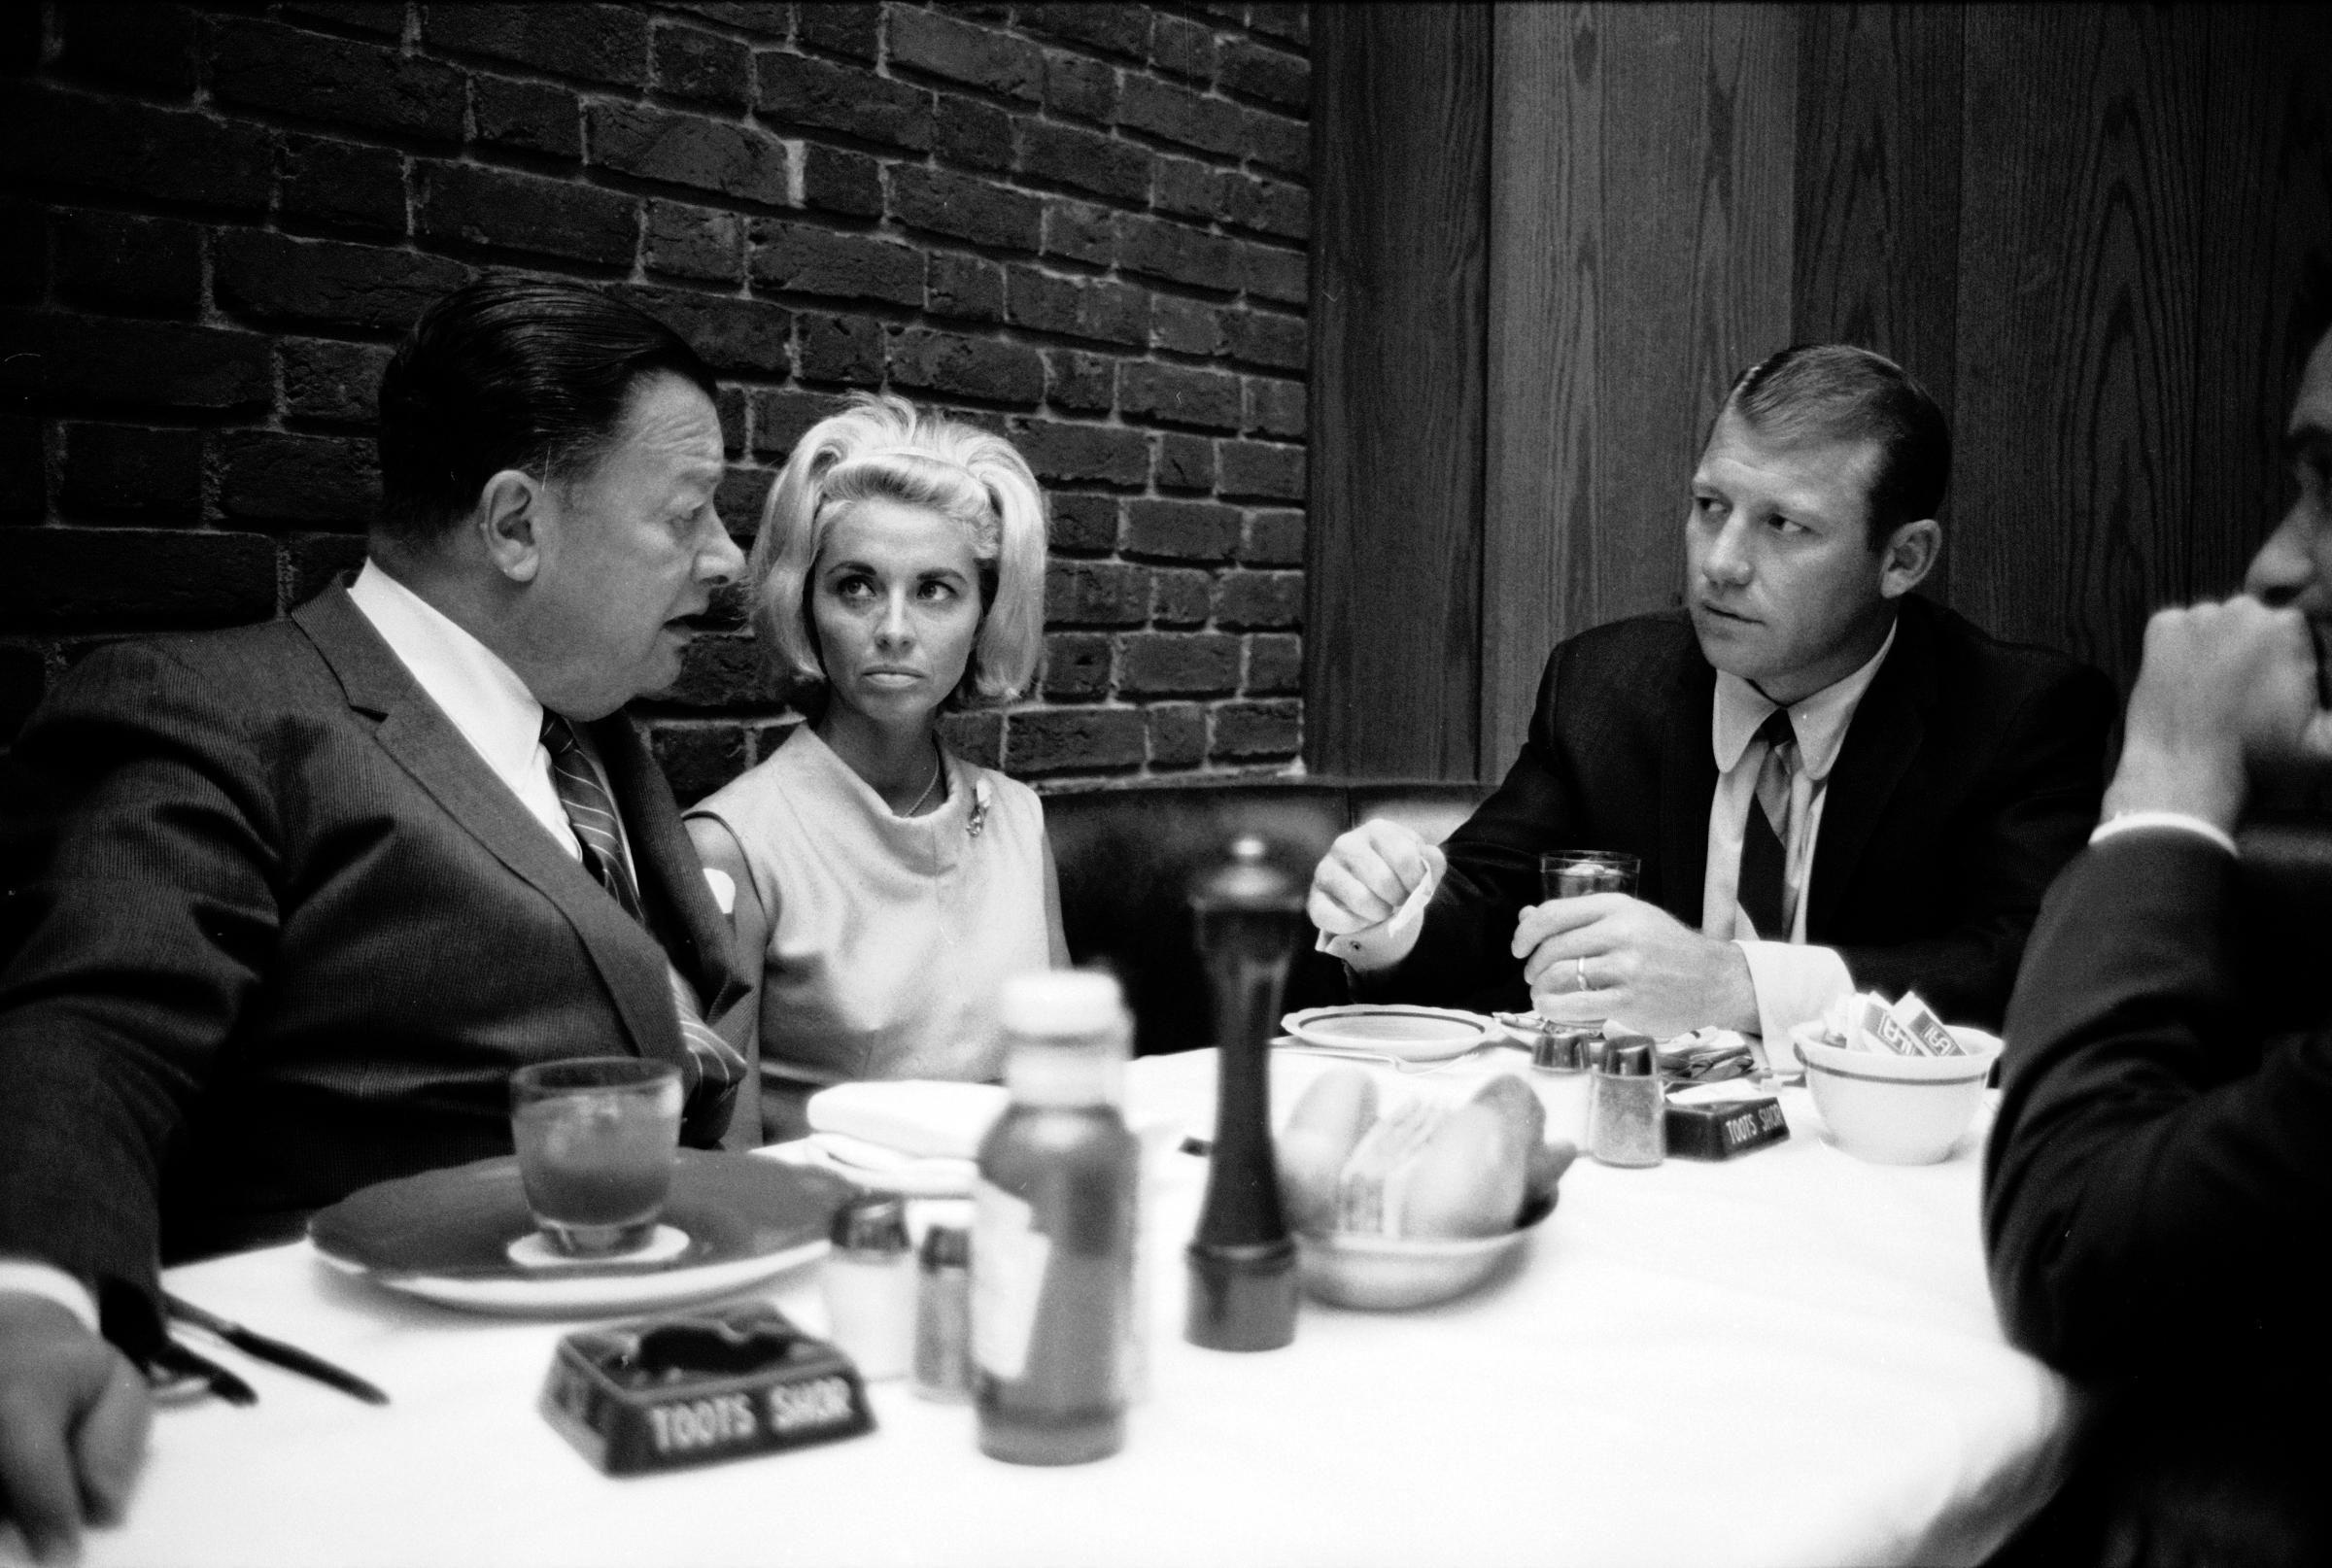 Left to right, self-described "saloon keeper" Bernard "Toots" Shor talks with Merlyn Mantle and husband Mickey at Shor's restaurant, New York, NY, June 1965.